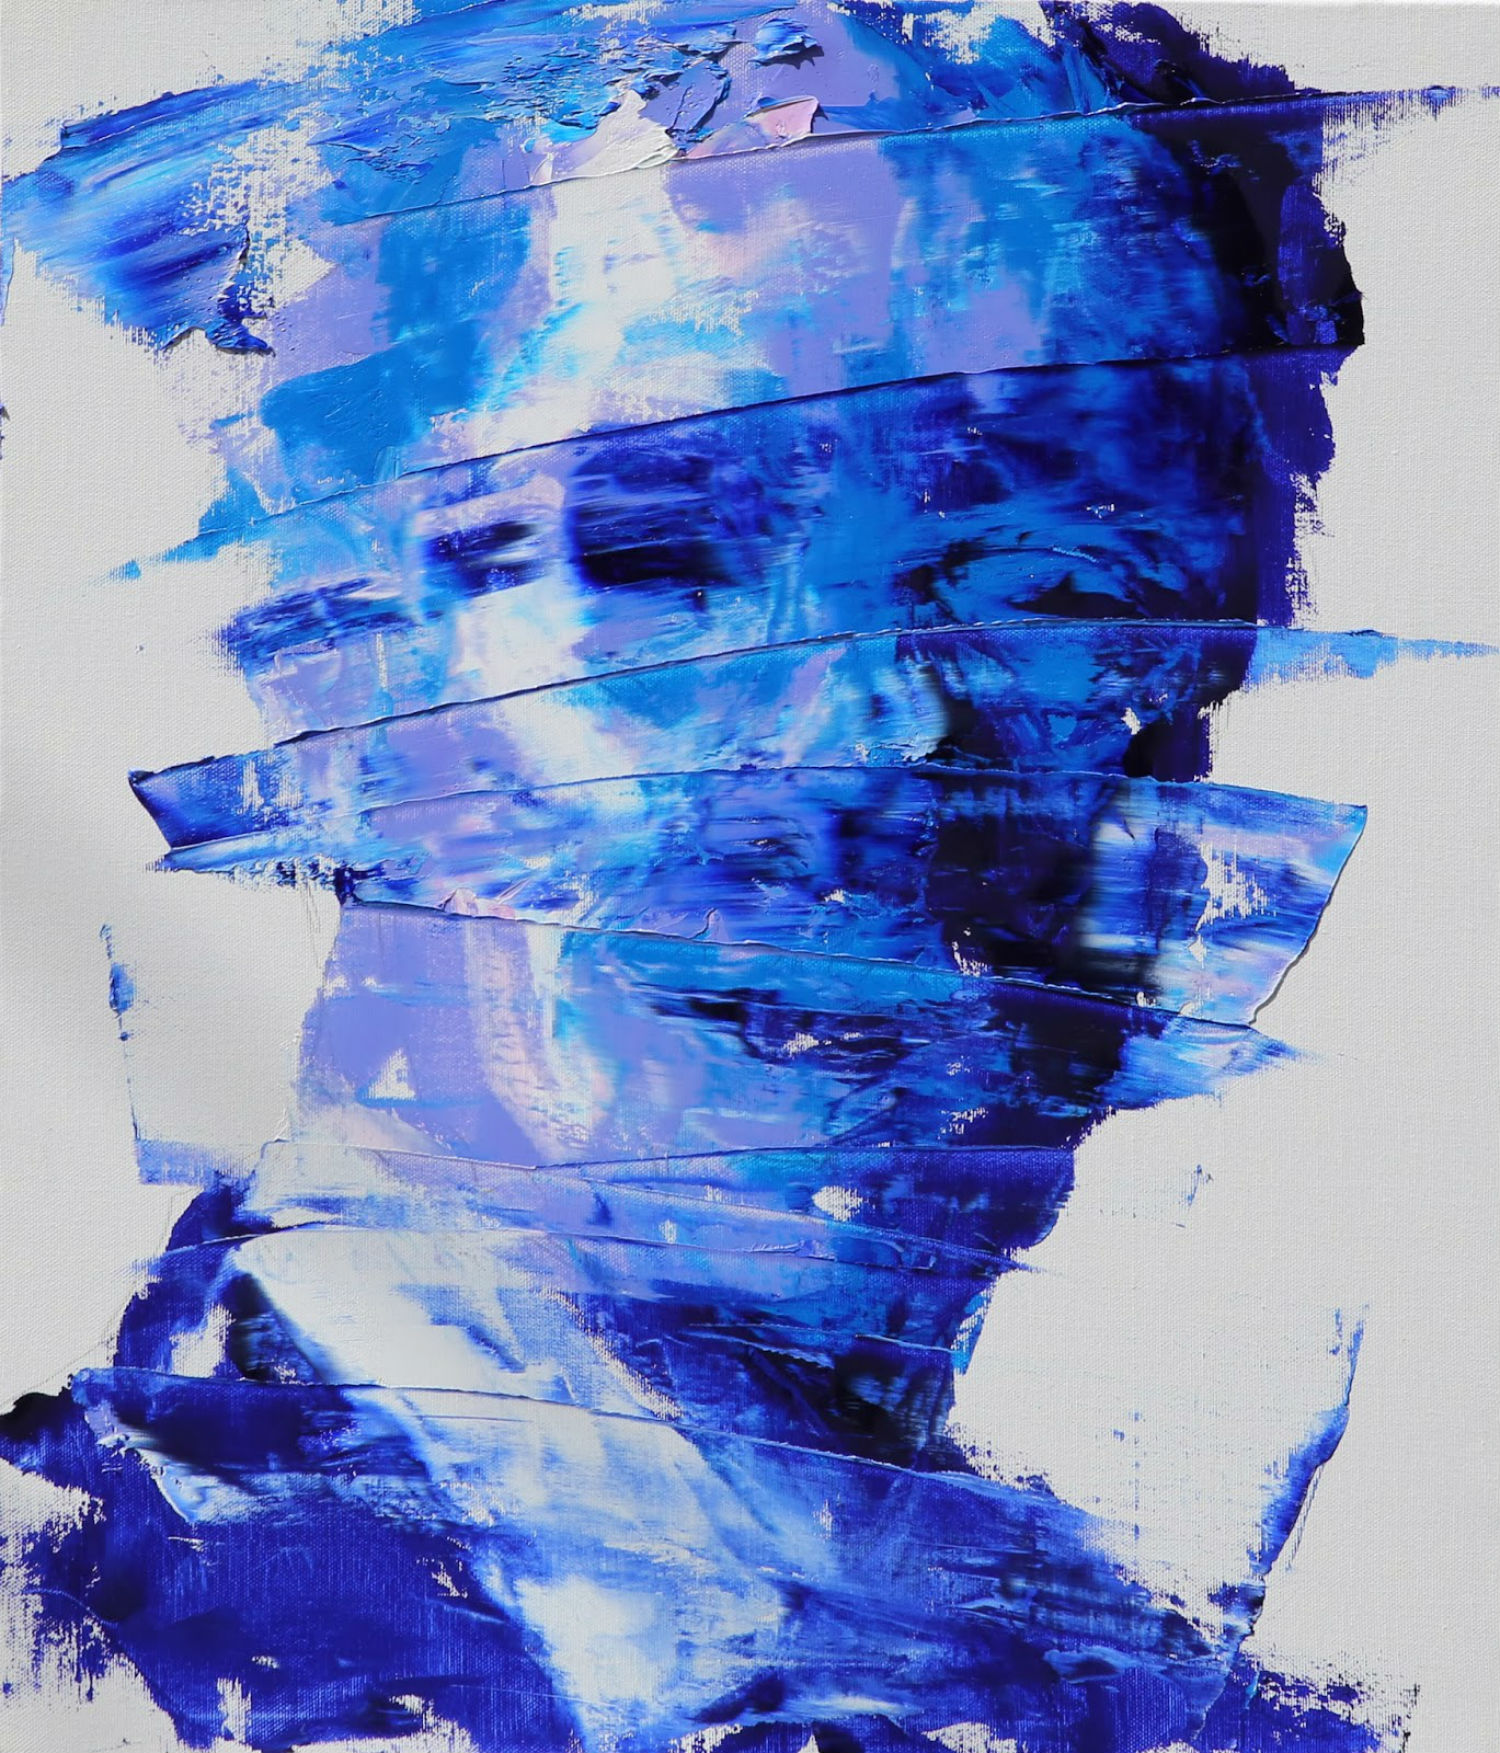 LIm Cheol hee paintings colour abstract portrait